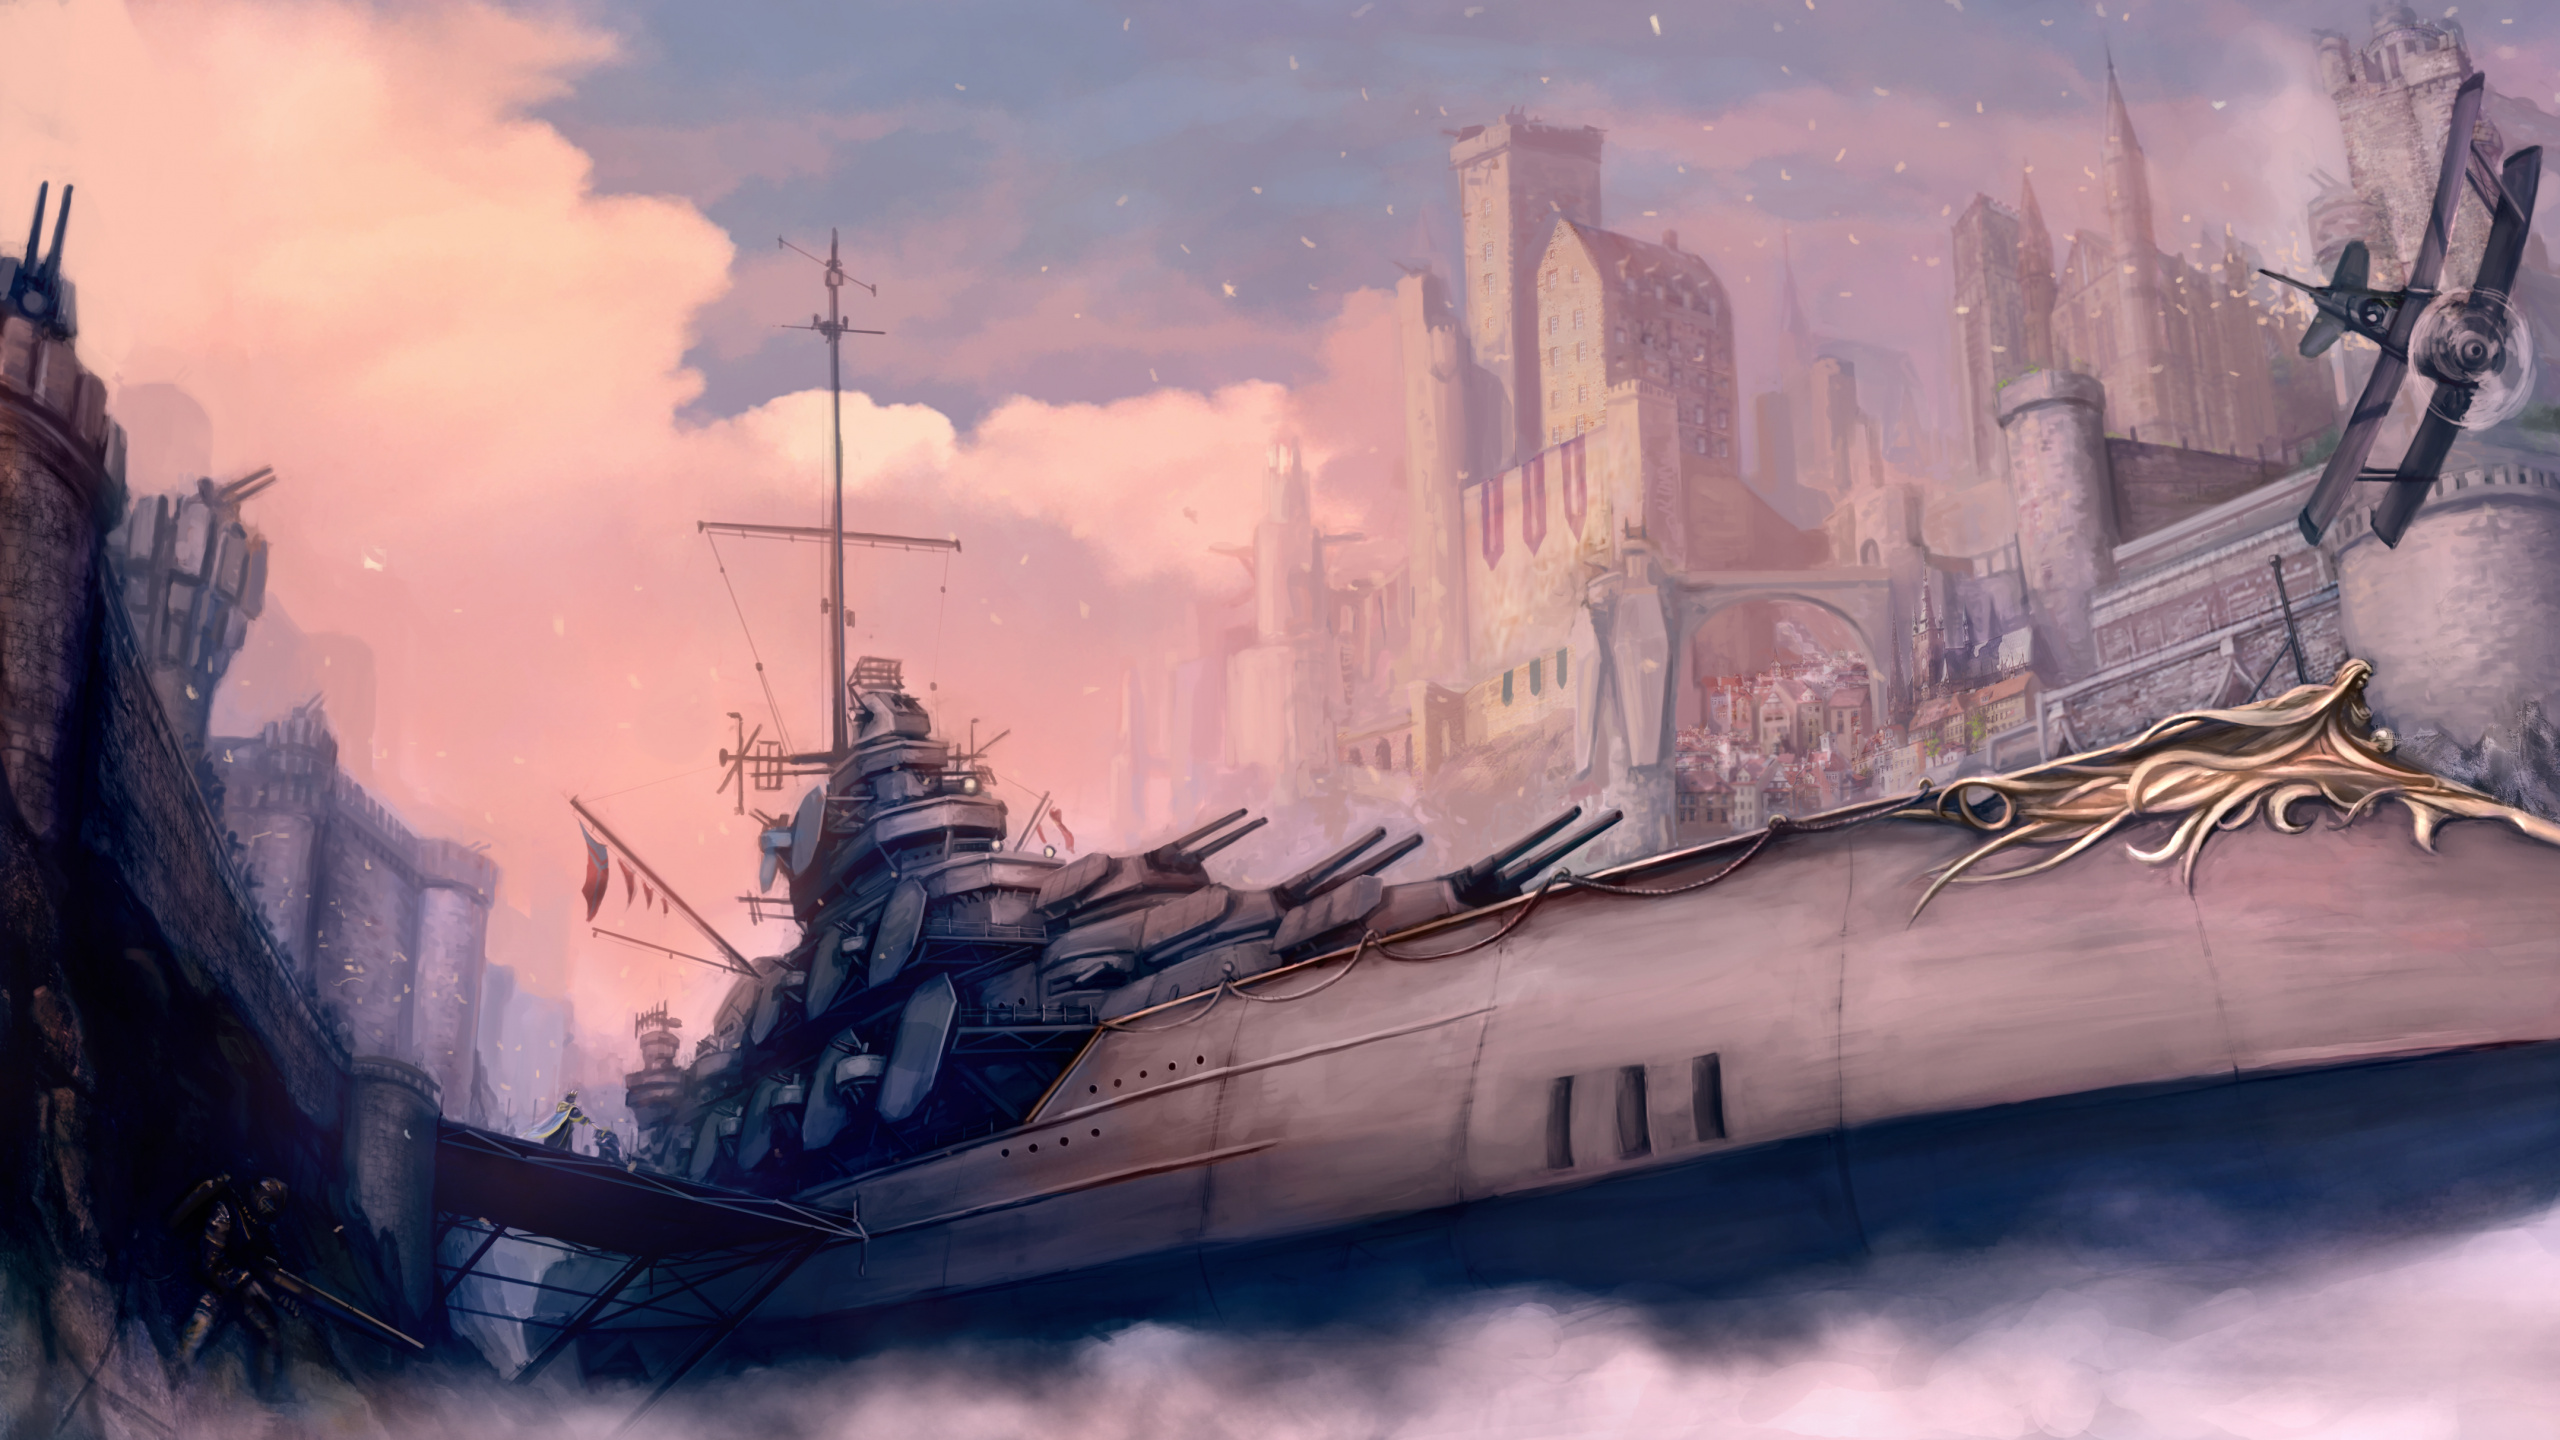 Steampunk, Ship, Airship, Painting, Watercolor Paint. Wallpaper in 2560x1440 Resolution